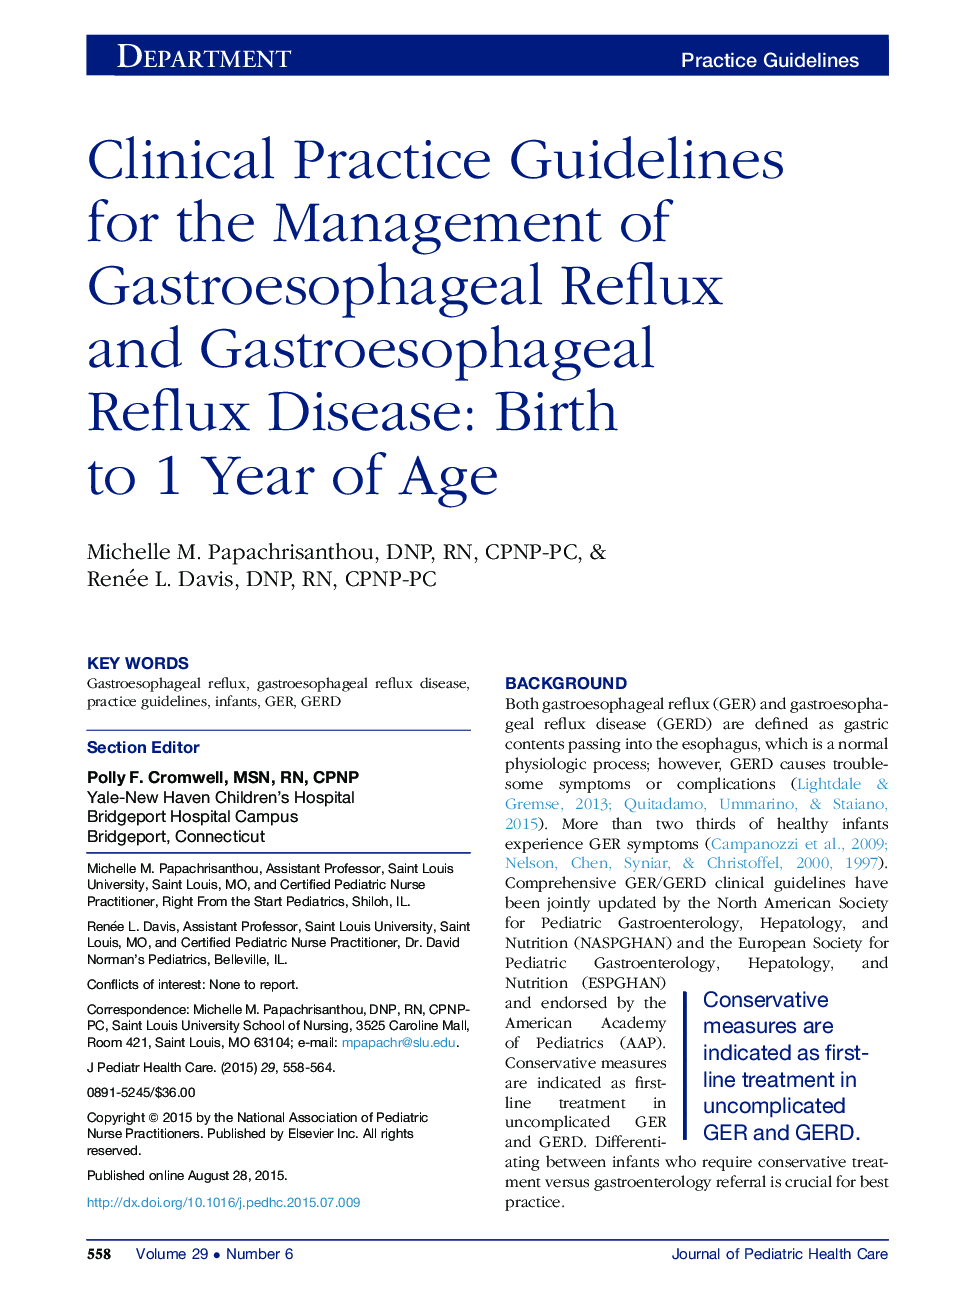 Clinical Practice Guidelines for the Management of Gastroesophageal Reflux and Gastroesophageal Reflux Disease: Birth toÂ 1Â Year of Age